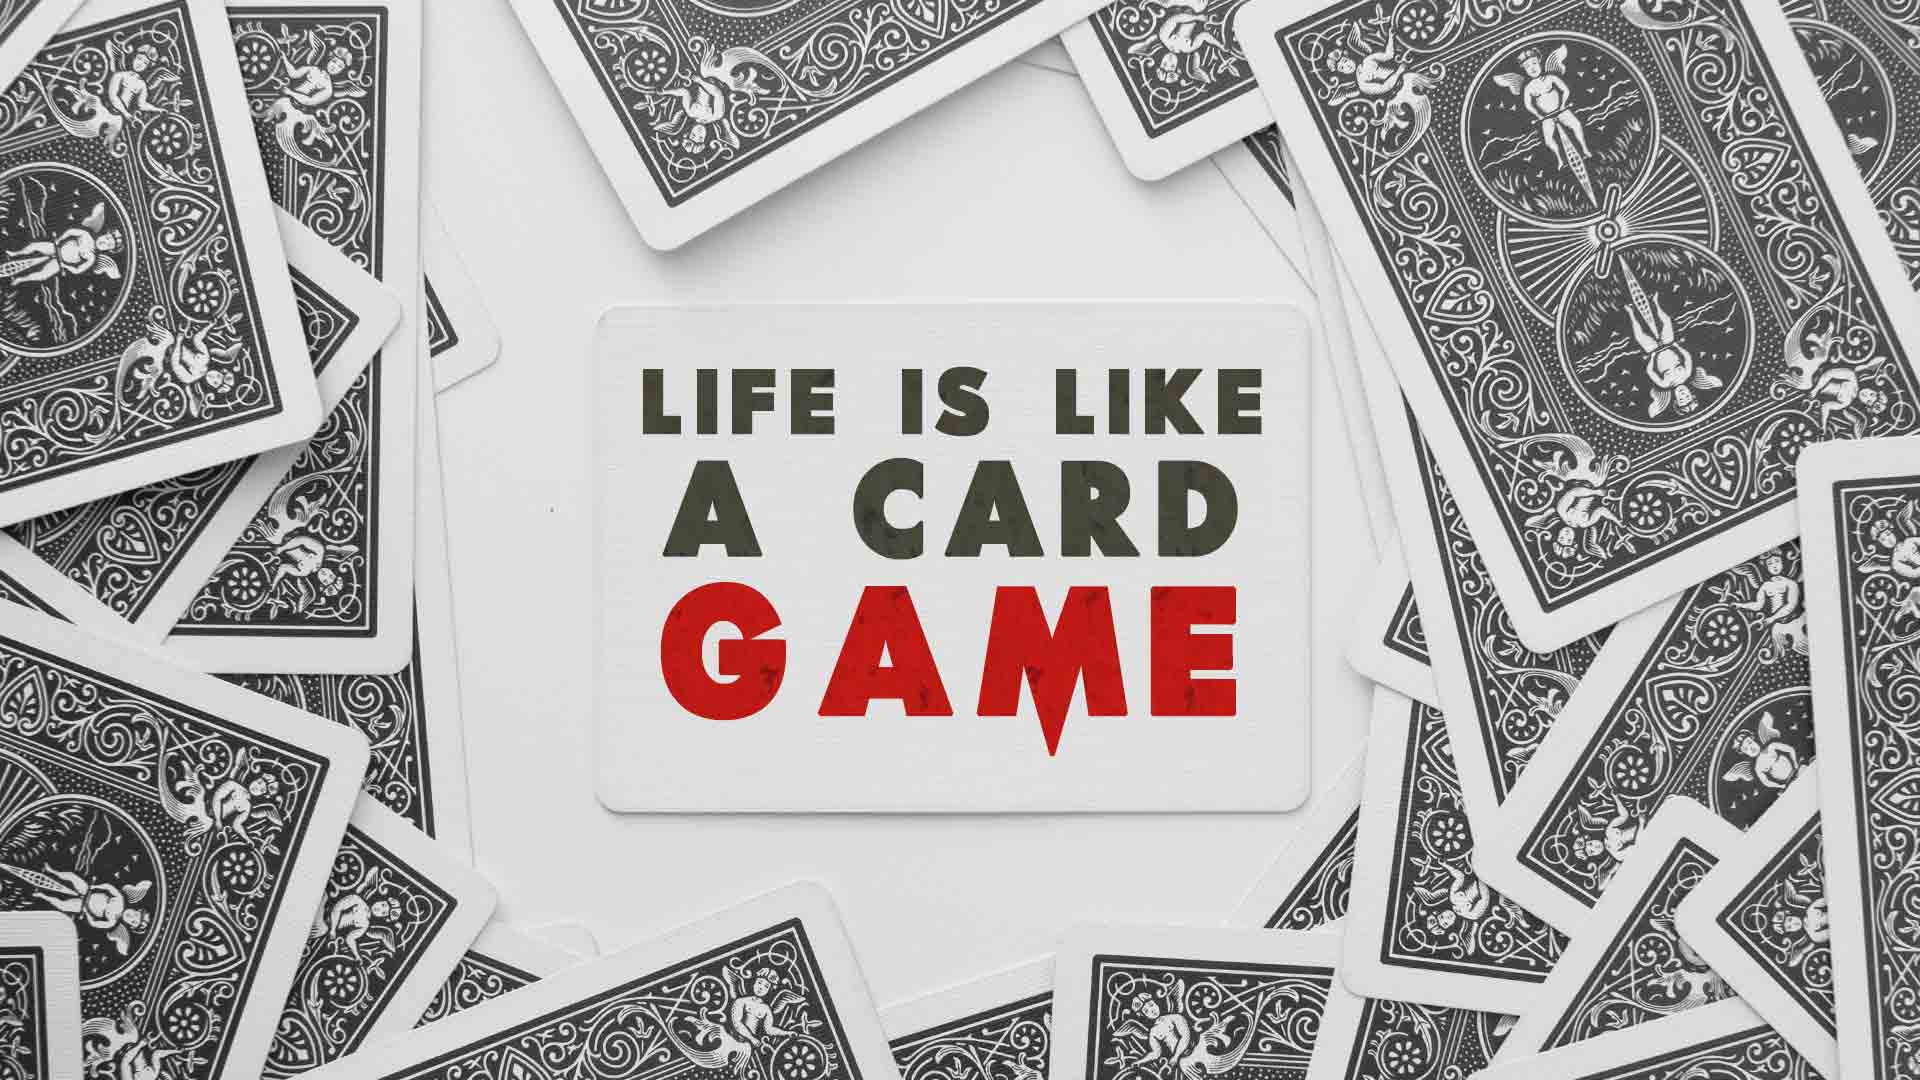 life-is-like-a-card-game-motivational-quote-photo-manipulation